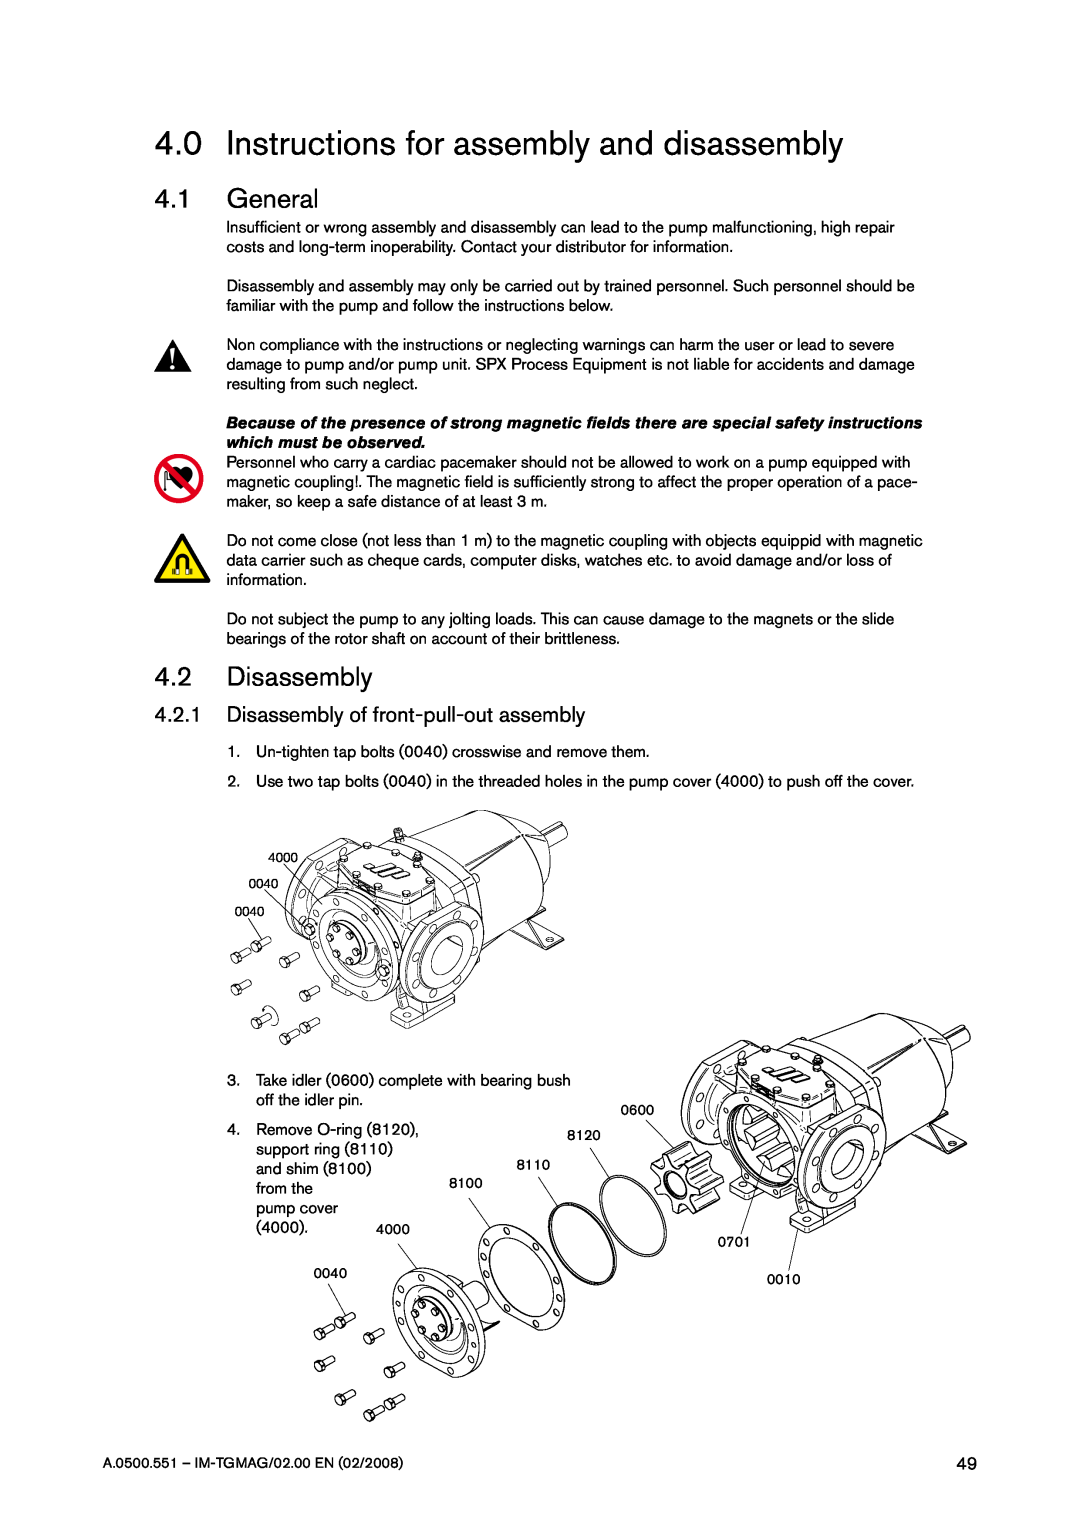 SPX Cooling Technologies TG MAG86-100 4.0Instructions for assembly and disassembly, 4.1General, 4.2Disassembly 